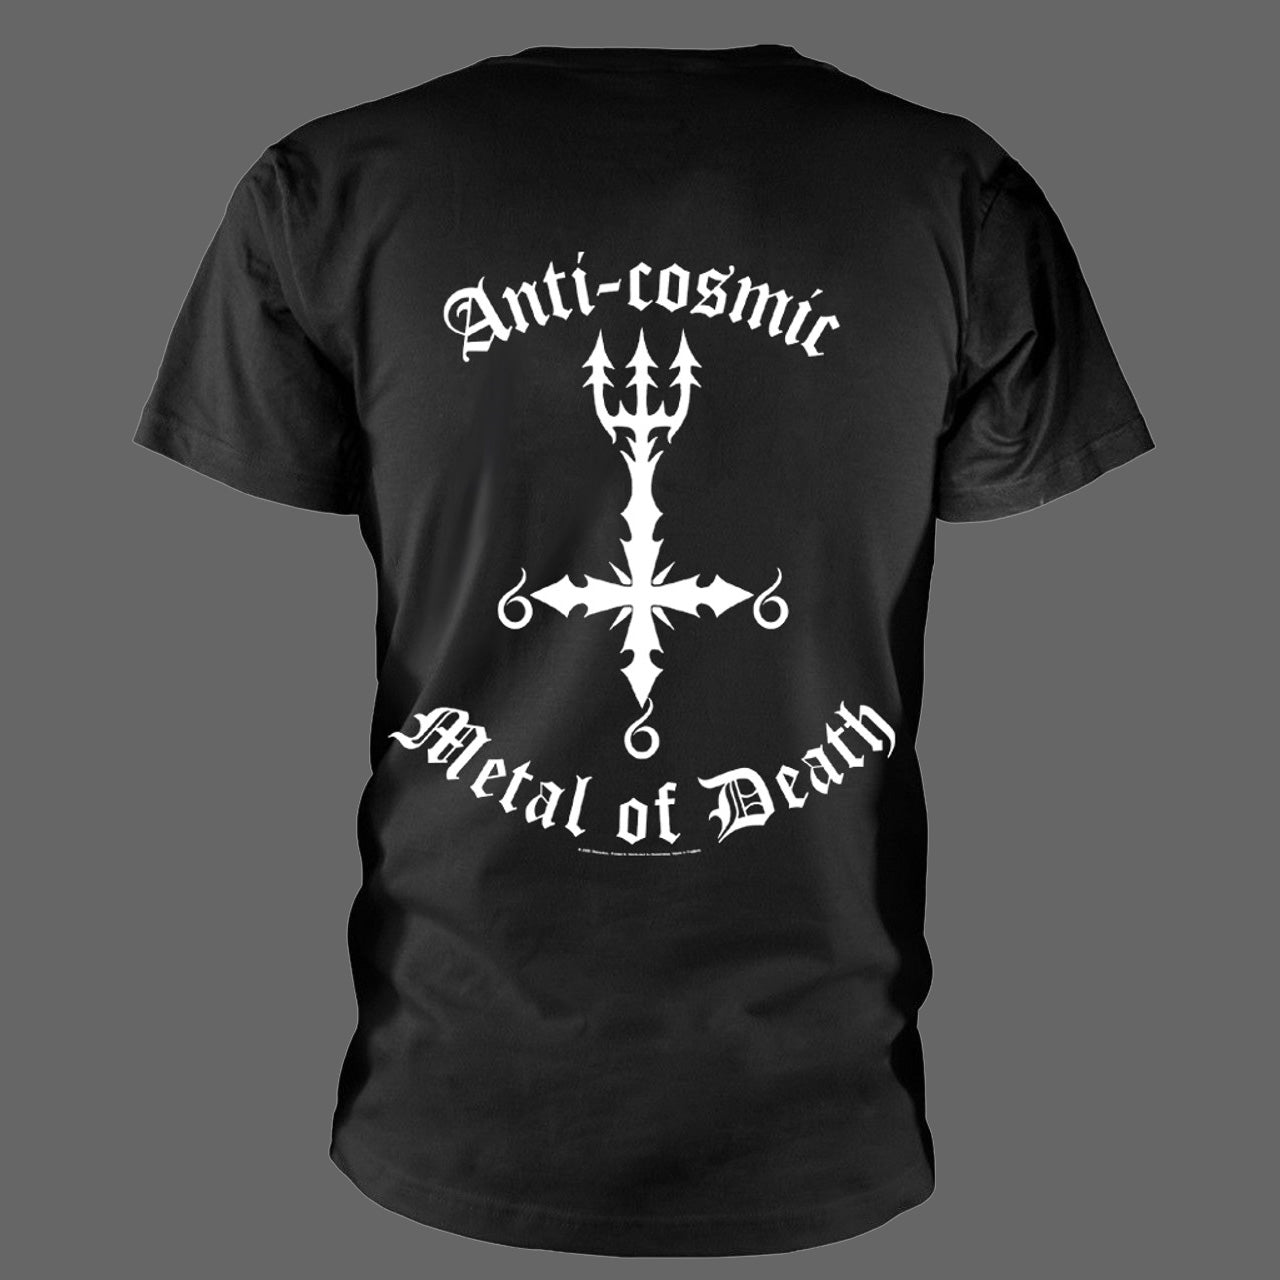 Dissection - Reaper / Anti-Cosmic Metal of Death (T-Shirt)